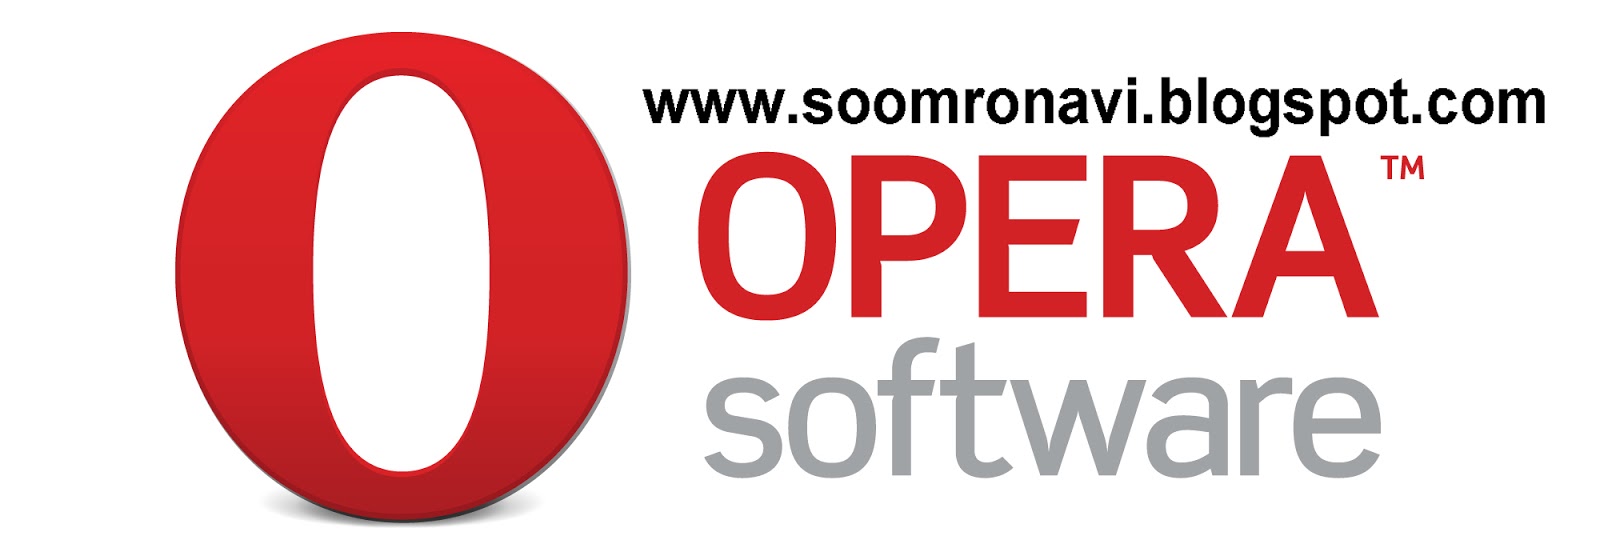 Opera for Windows 7.54 serial key or number